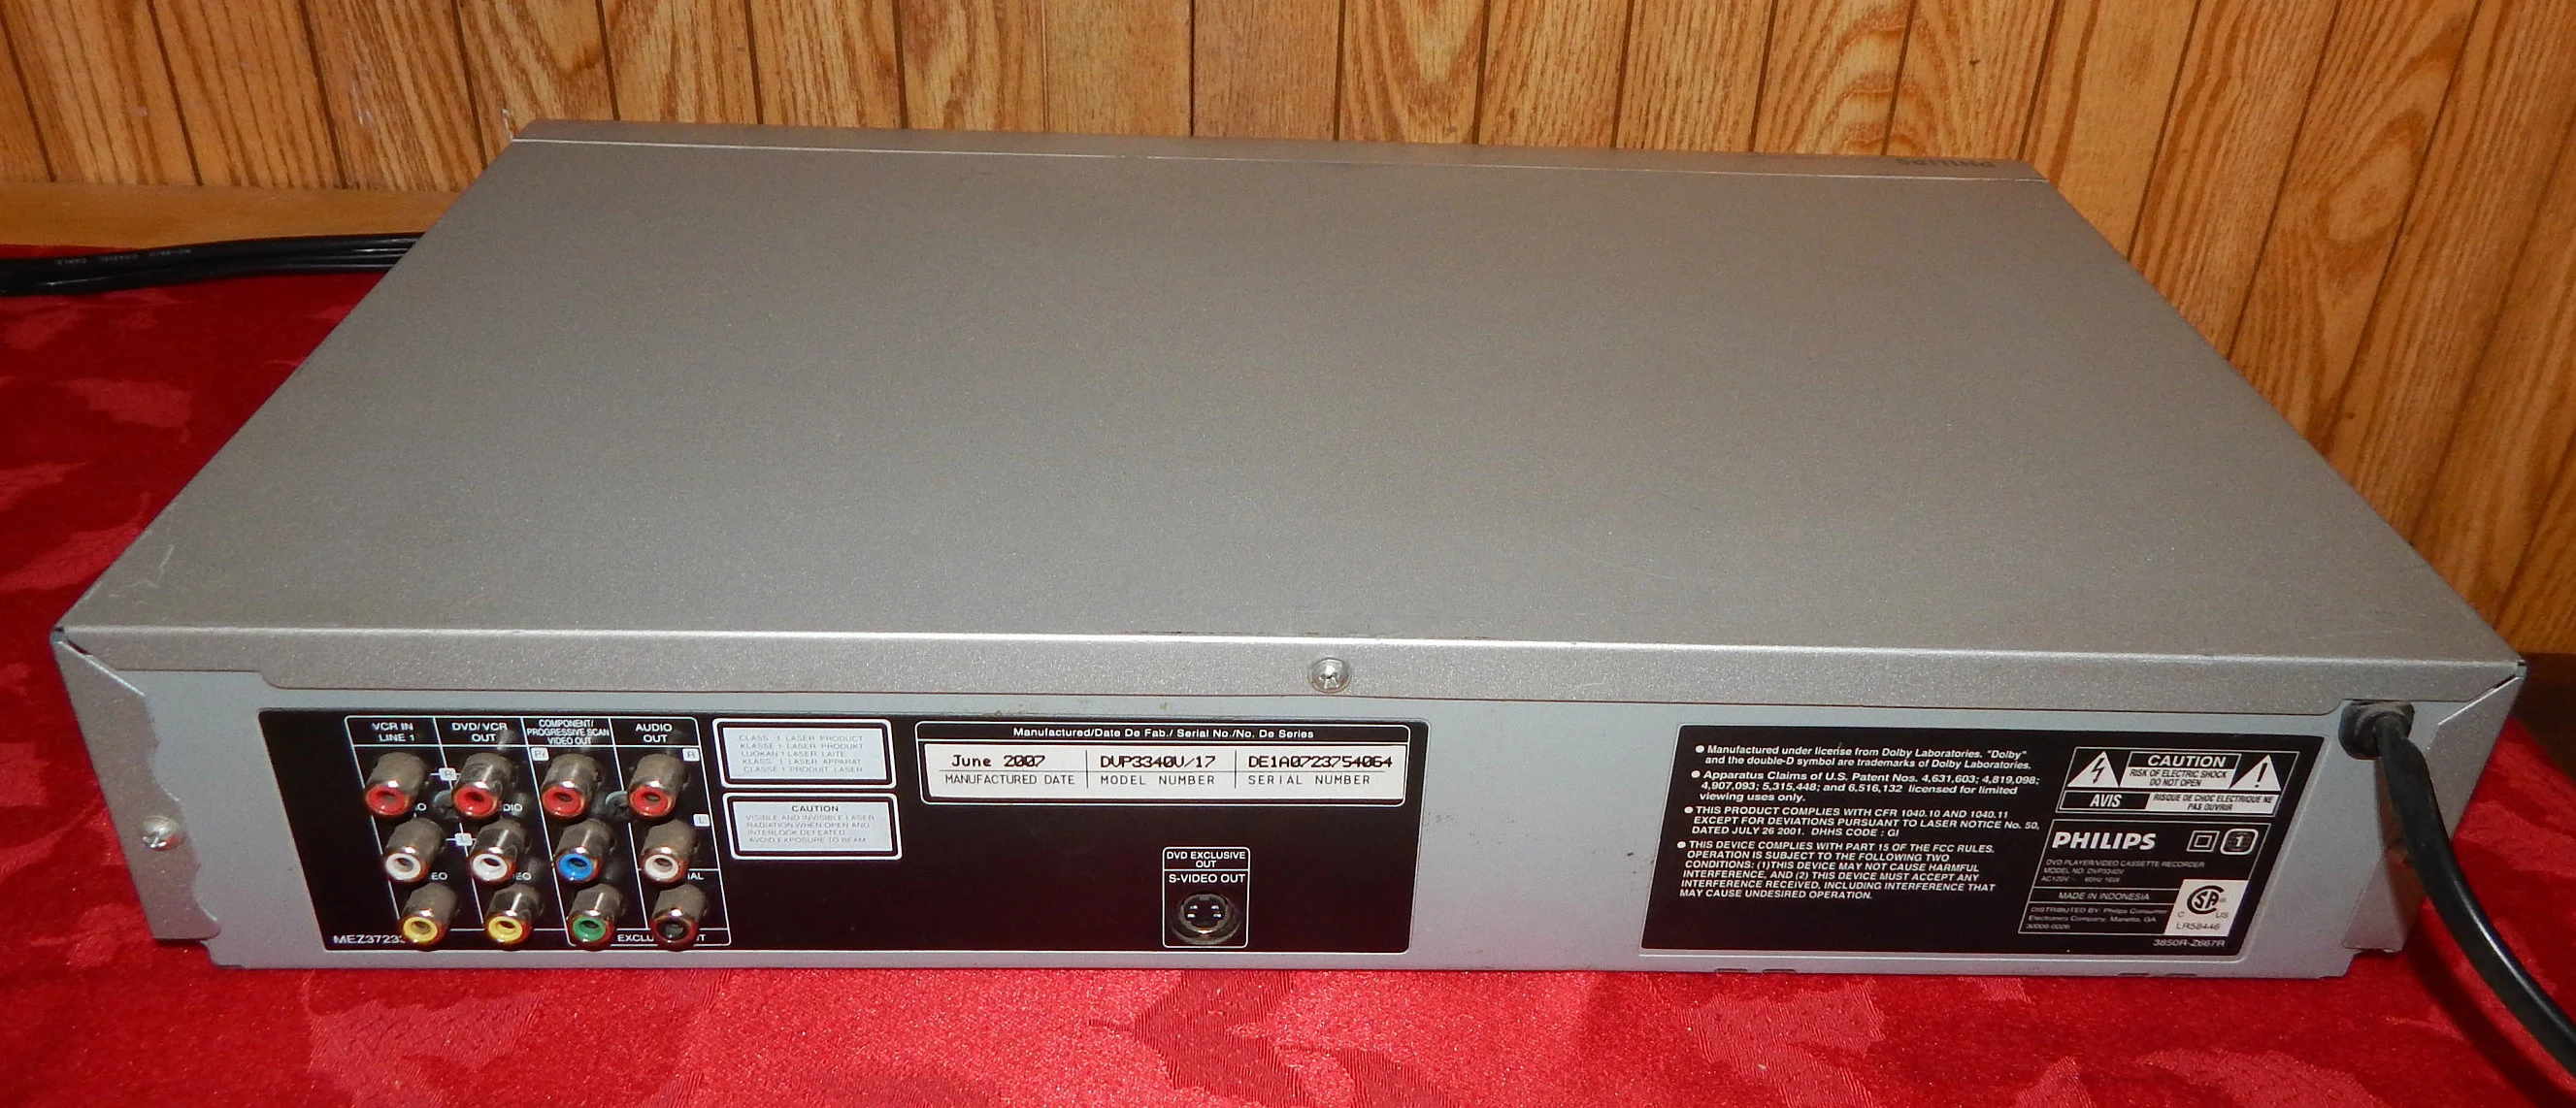 Used Philips DVP3340V DVD/VCR 4 Head Player Combo with Remote, Manual, A/V Cables and HDMI Converter - image 3 of 4